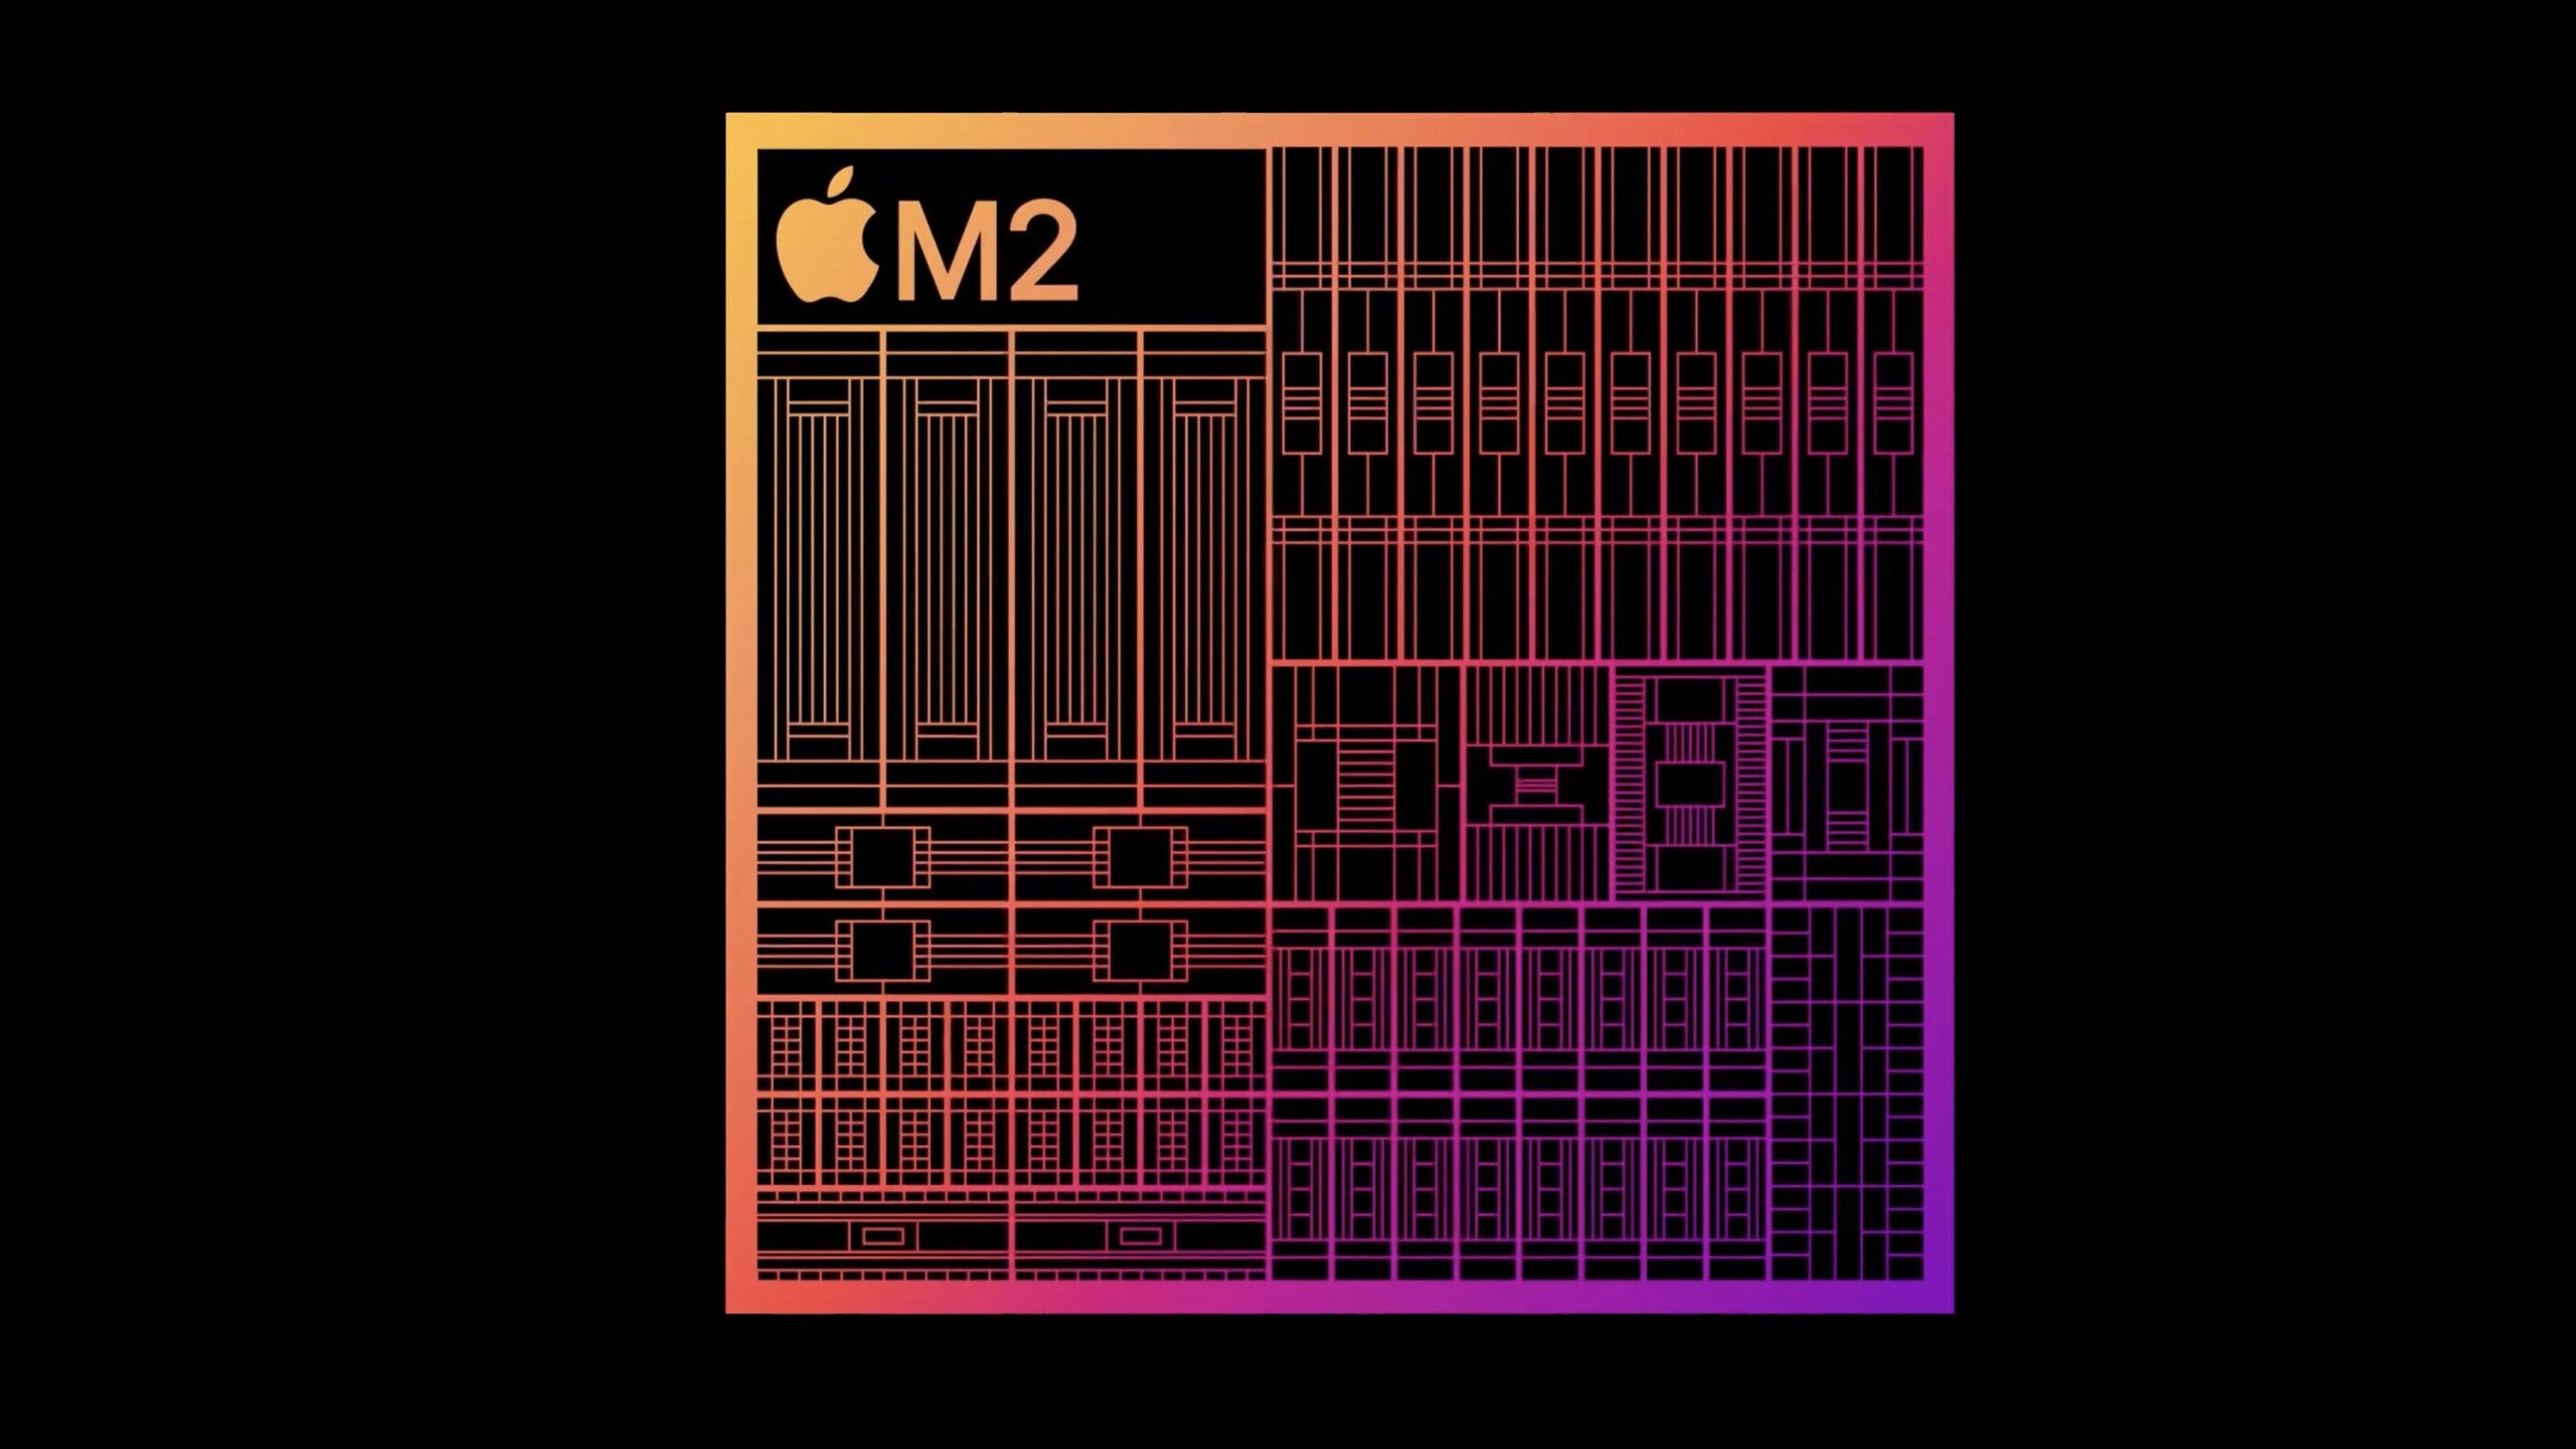 The Reality Pro will be powered by the 5nm M2 chipset with 20 billion transistors inside - Apple's long-awaited AR/VR headset to be unveiled at WWDC in June says fresh report